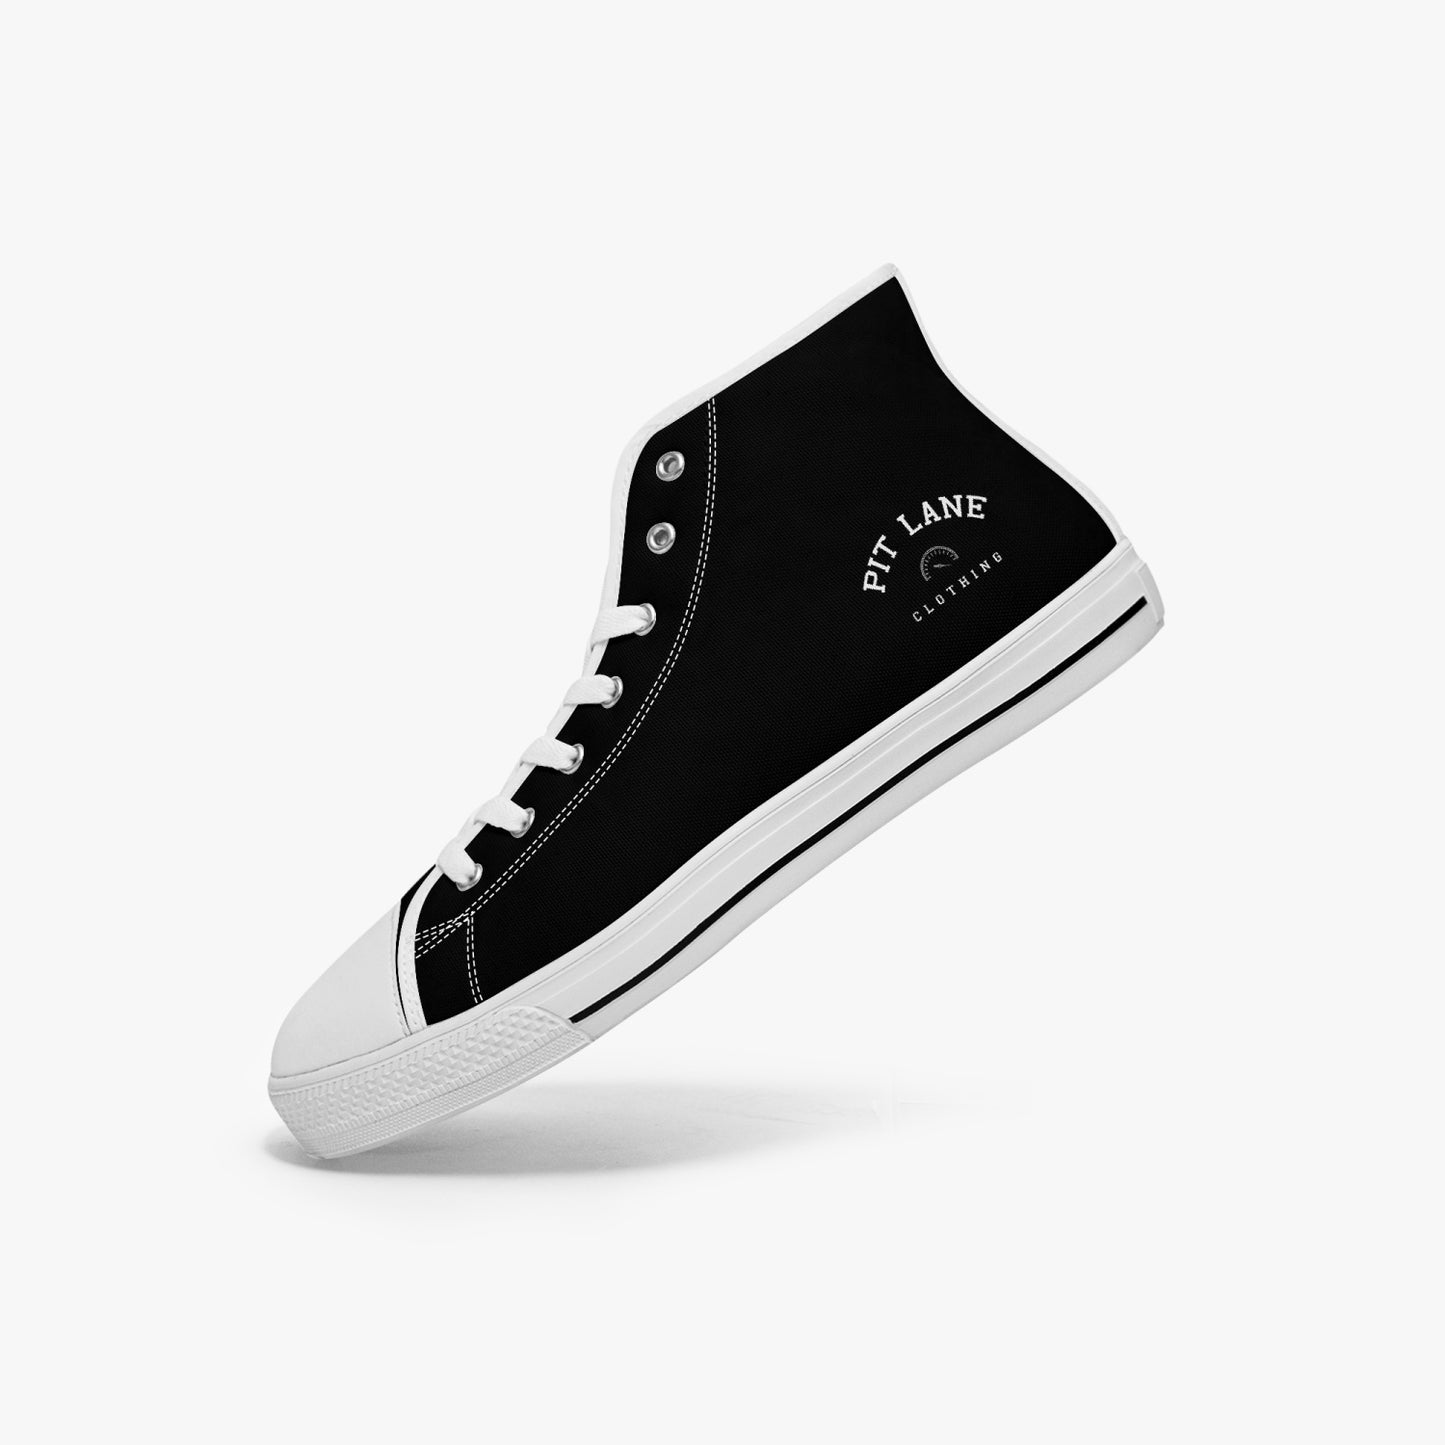 PIT LANE CLOTHING High-top Canvas Shoes